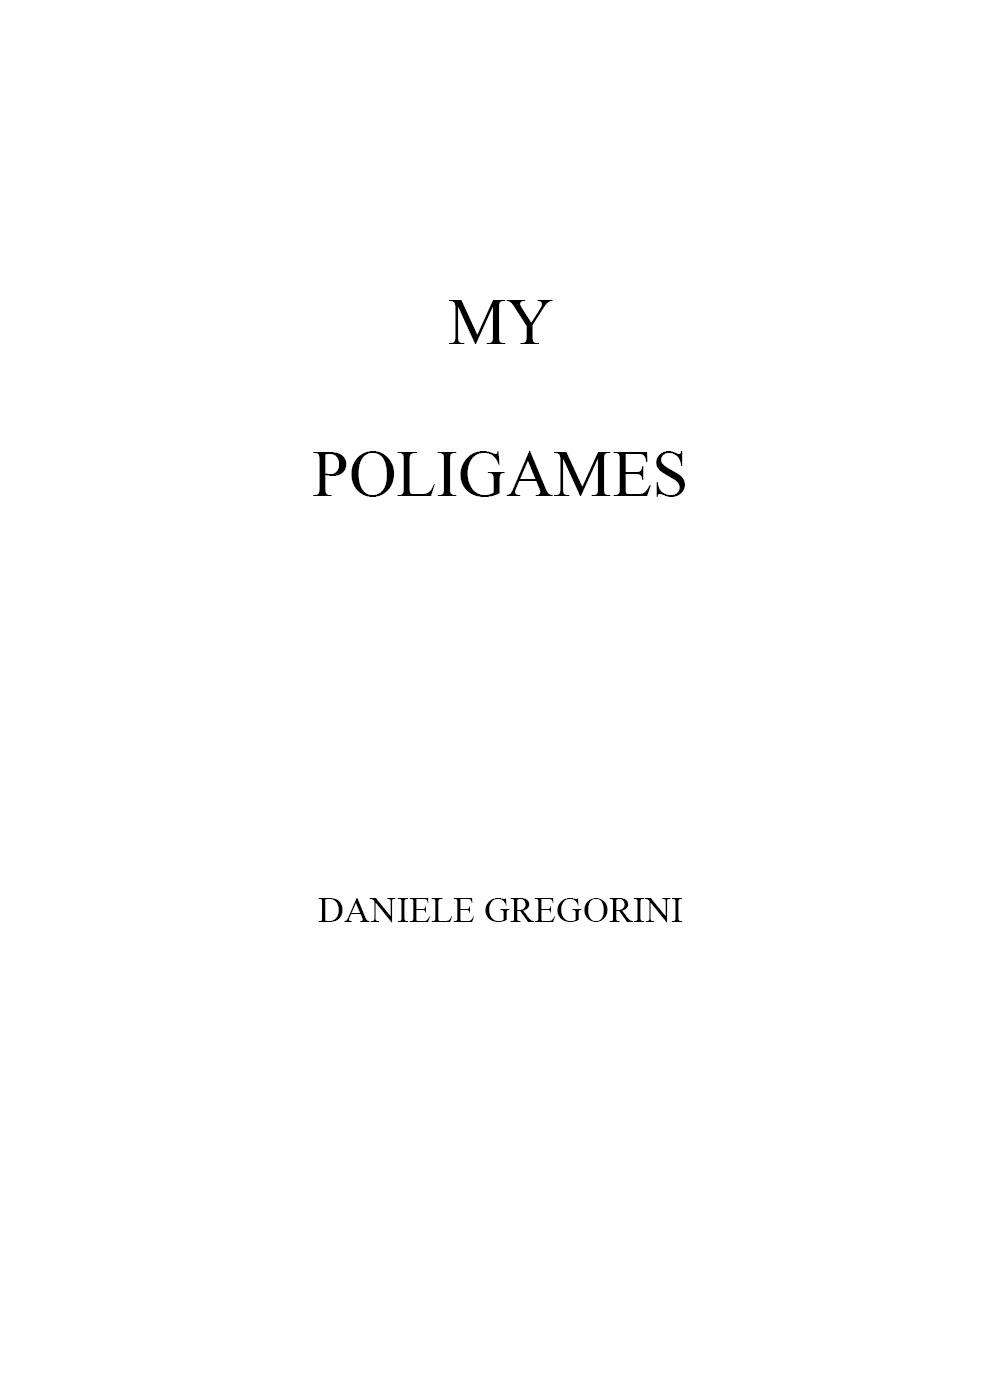 My poligames